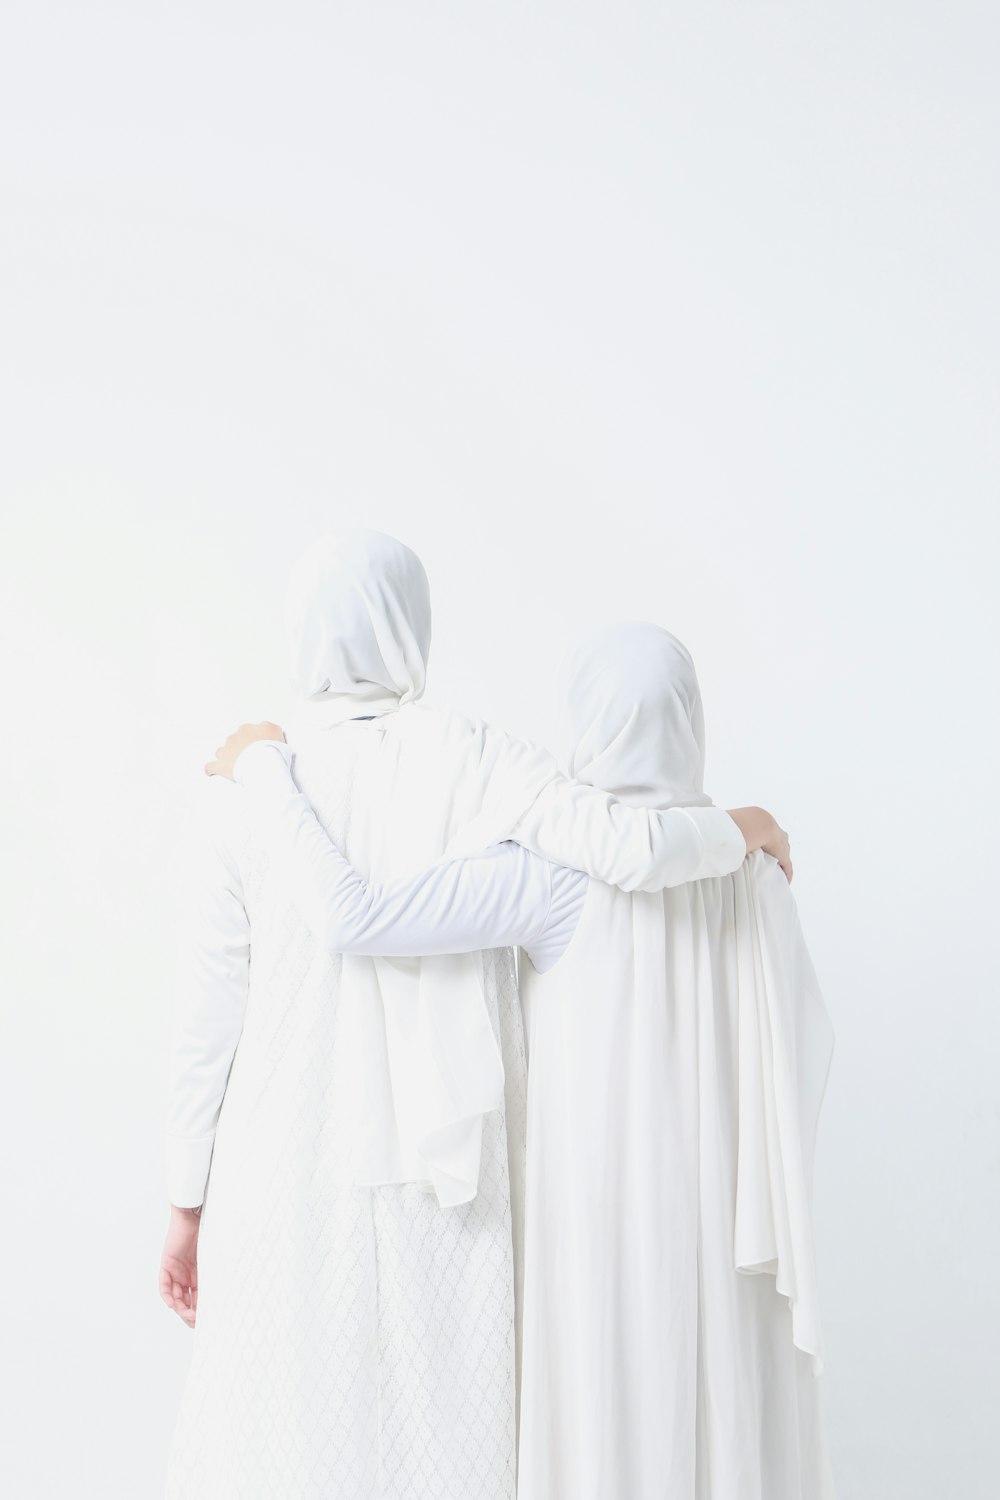 two women dressed in white standing next to each other